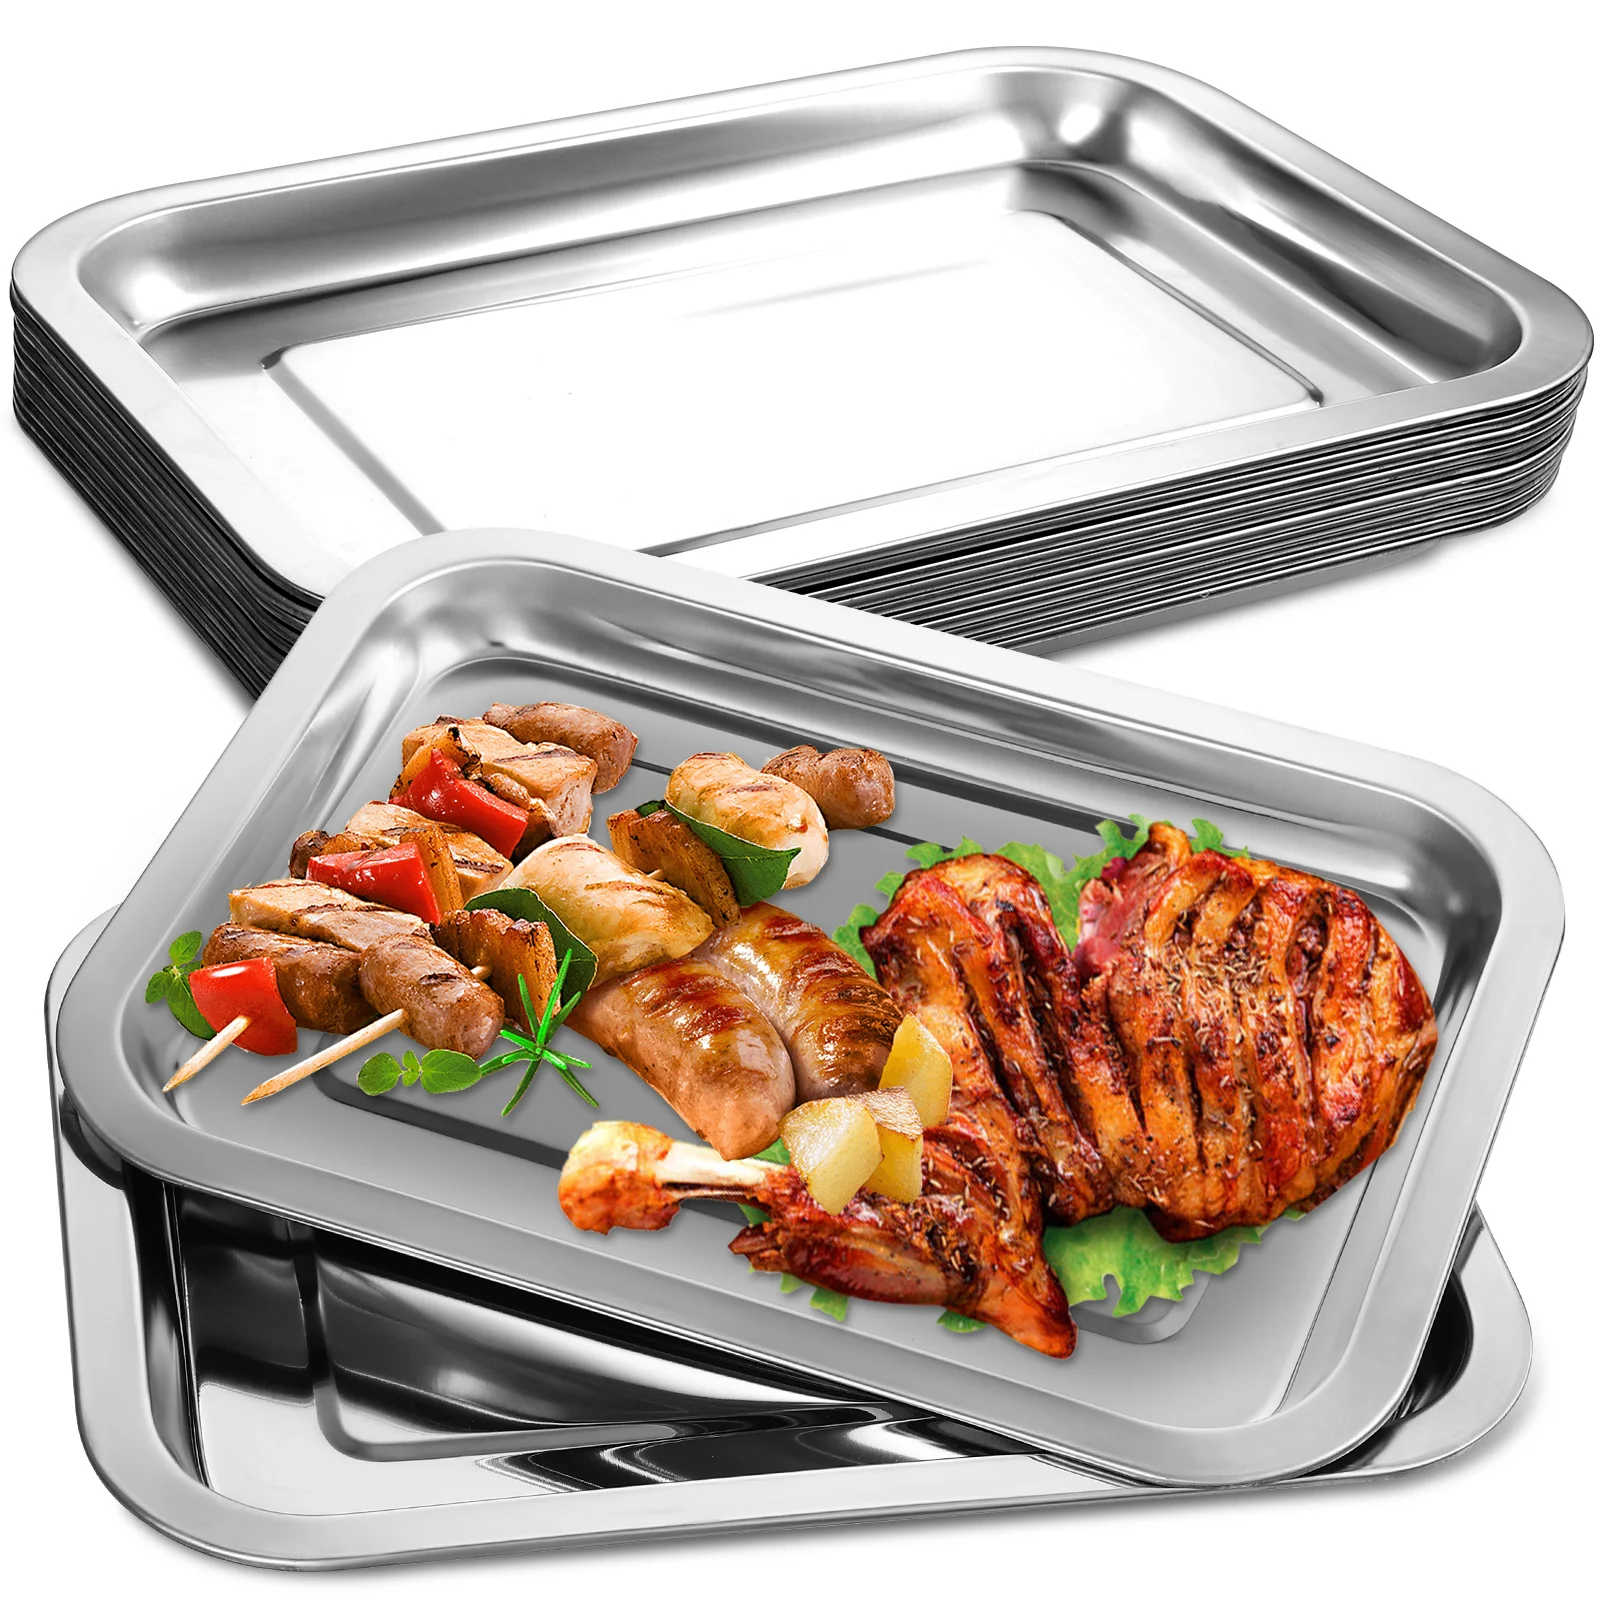 

10 Pcs Bakeware Stainless Steel Biscuits Tray Baking Pans Trays 201 Container Plates